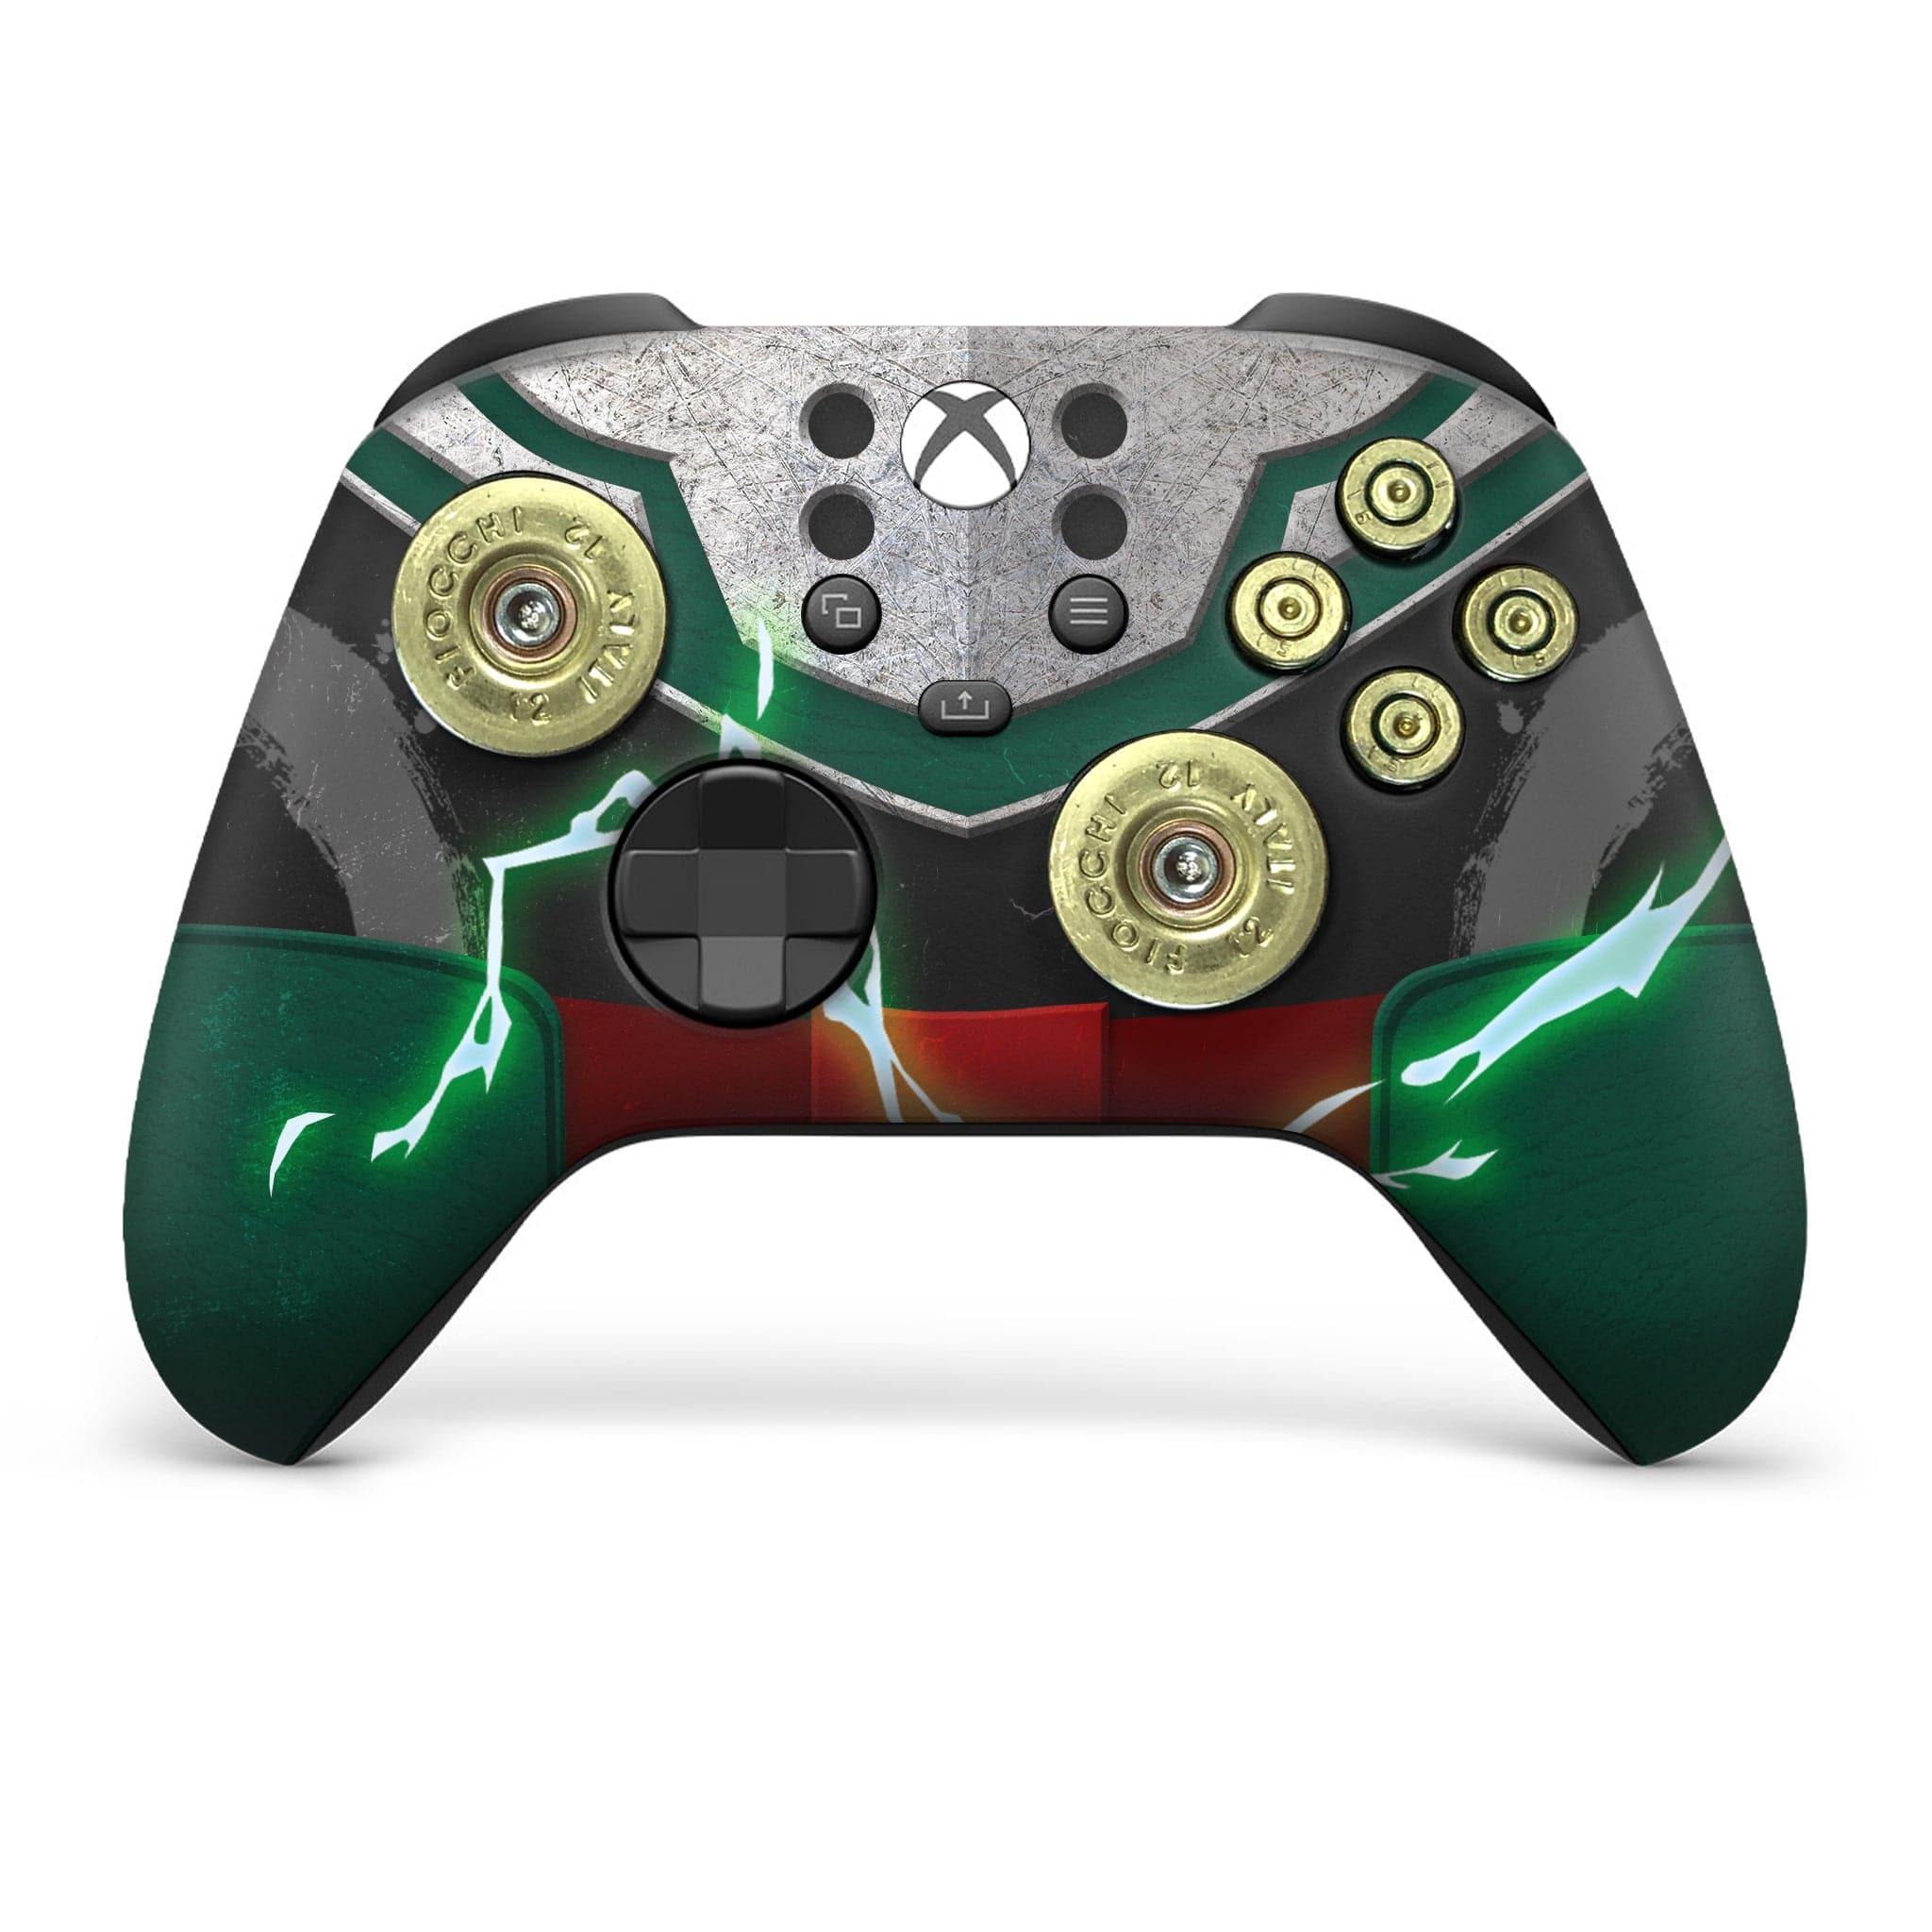 MHA DEKU inspired x box series x controller with bullet buttons